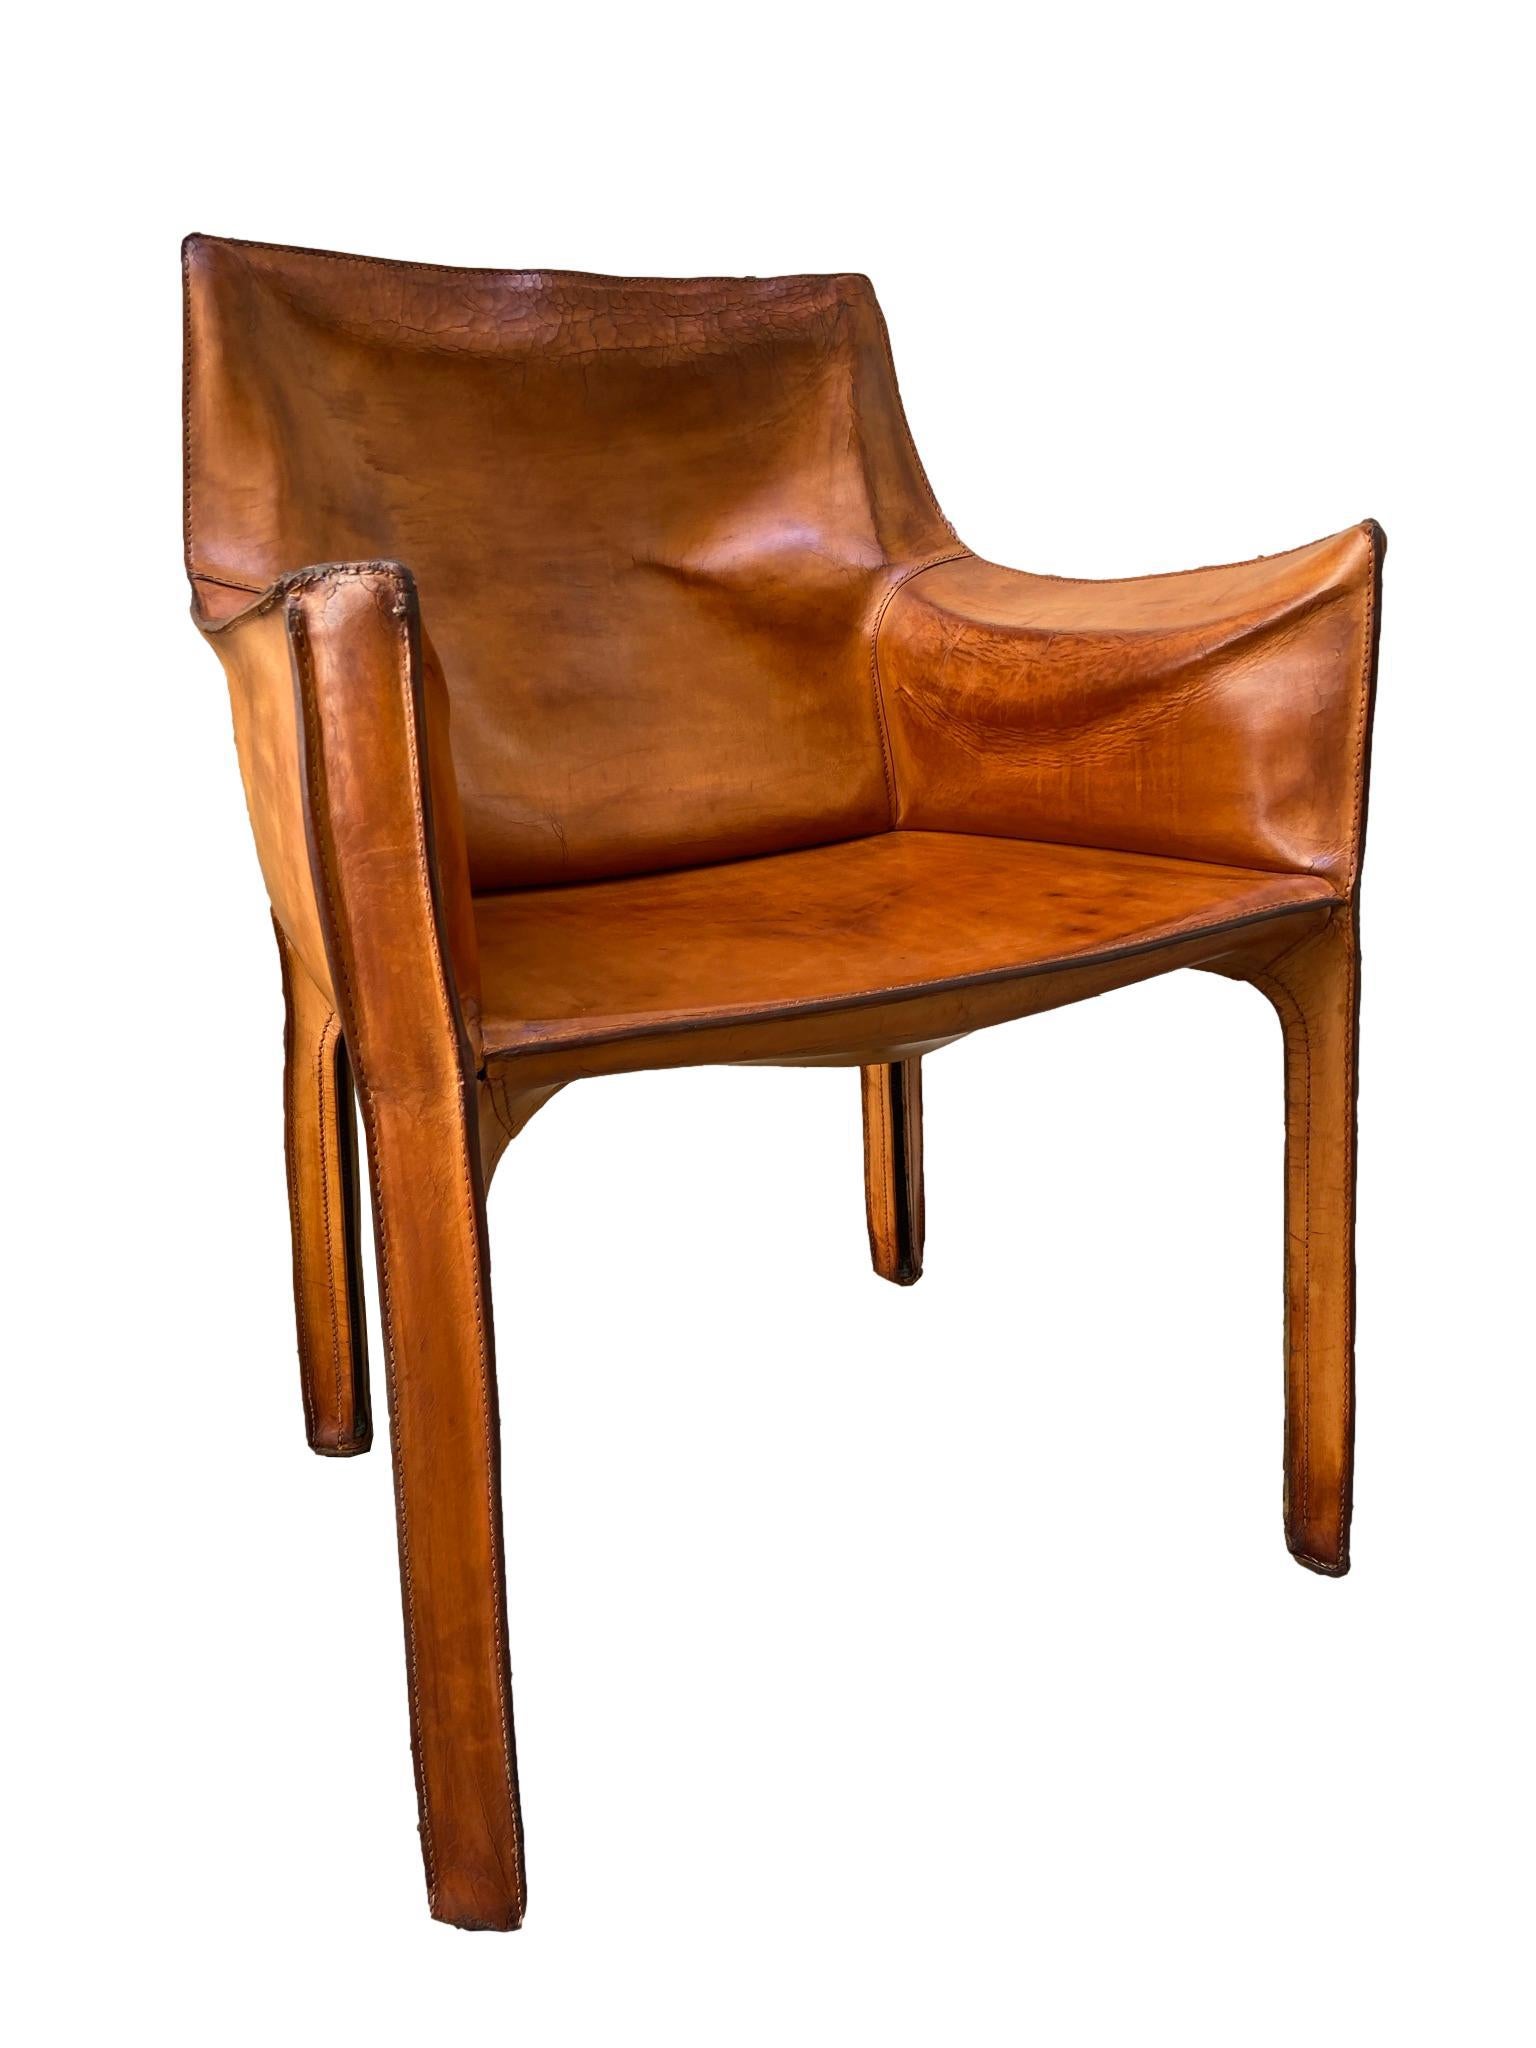 Mid-Century Modern Mario Bellini for Cassina Leather Cab Lounge Chair, Italy, 1970s